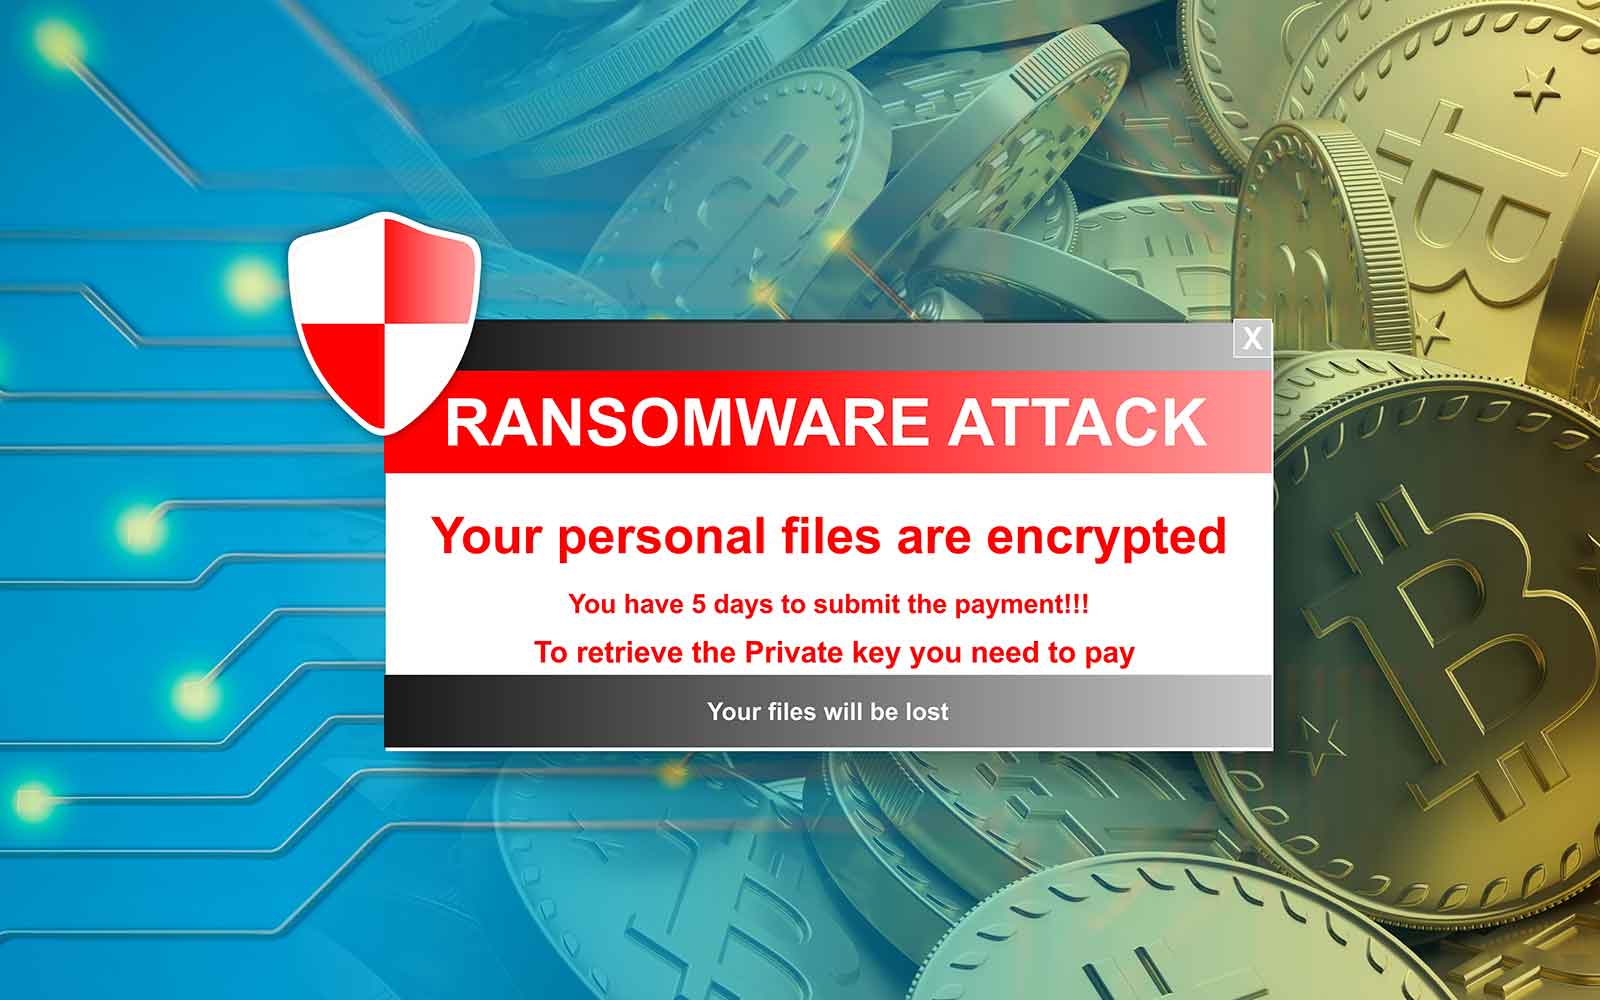 What Is Ransomware and How Does It Work? - InfoSec Insights